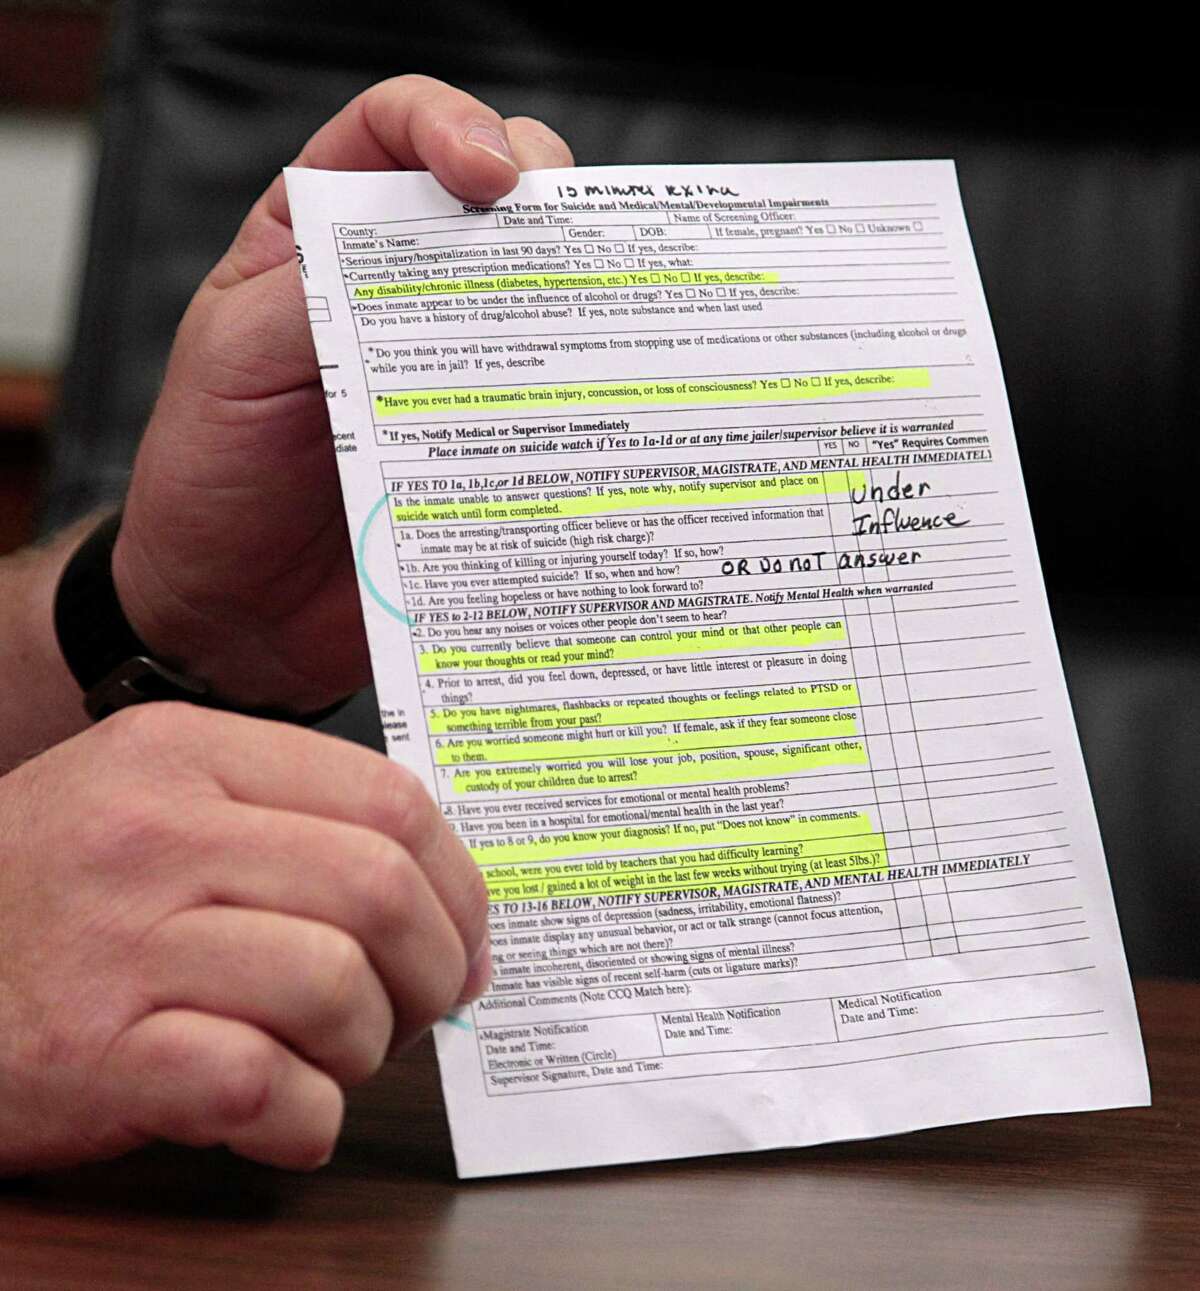 Fort Bend County Sheriff Troy Nehls holds a Screening Form for Suicide and Medical and Mental Impairments during an interview on recent suicides in the county's jail in Richmond.